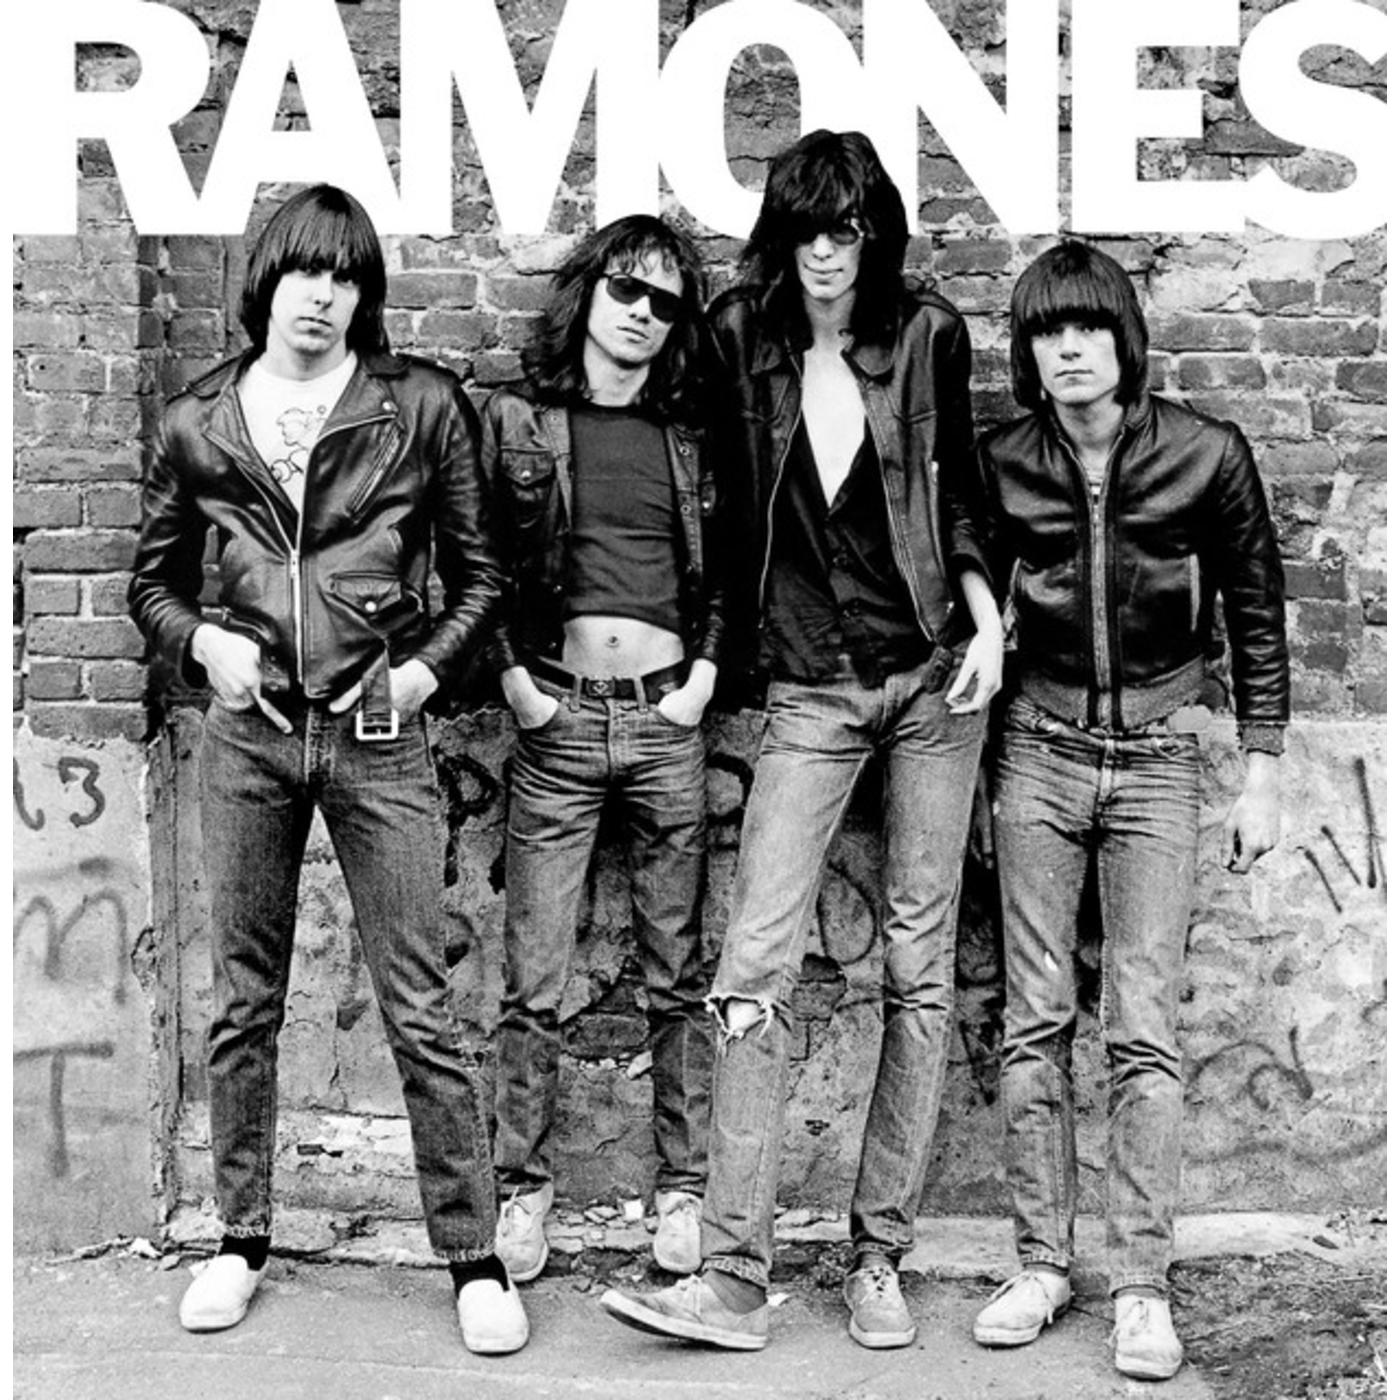 Ramones - 40th Anniversary Deluxe Edition (Remastered)